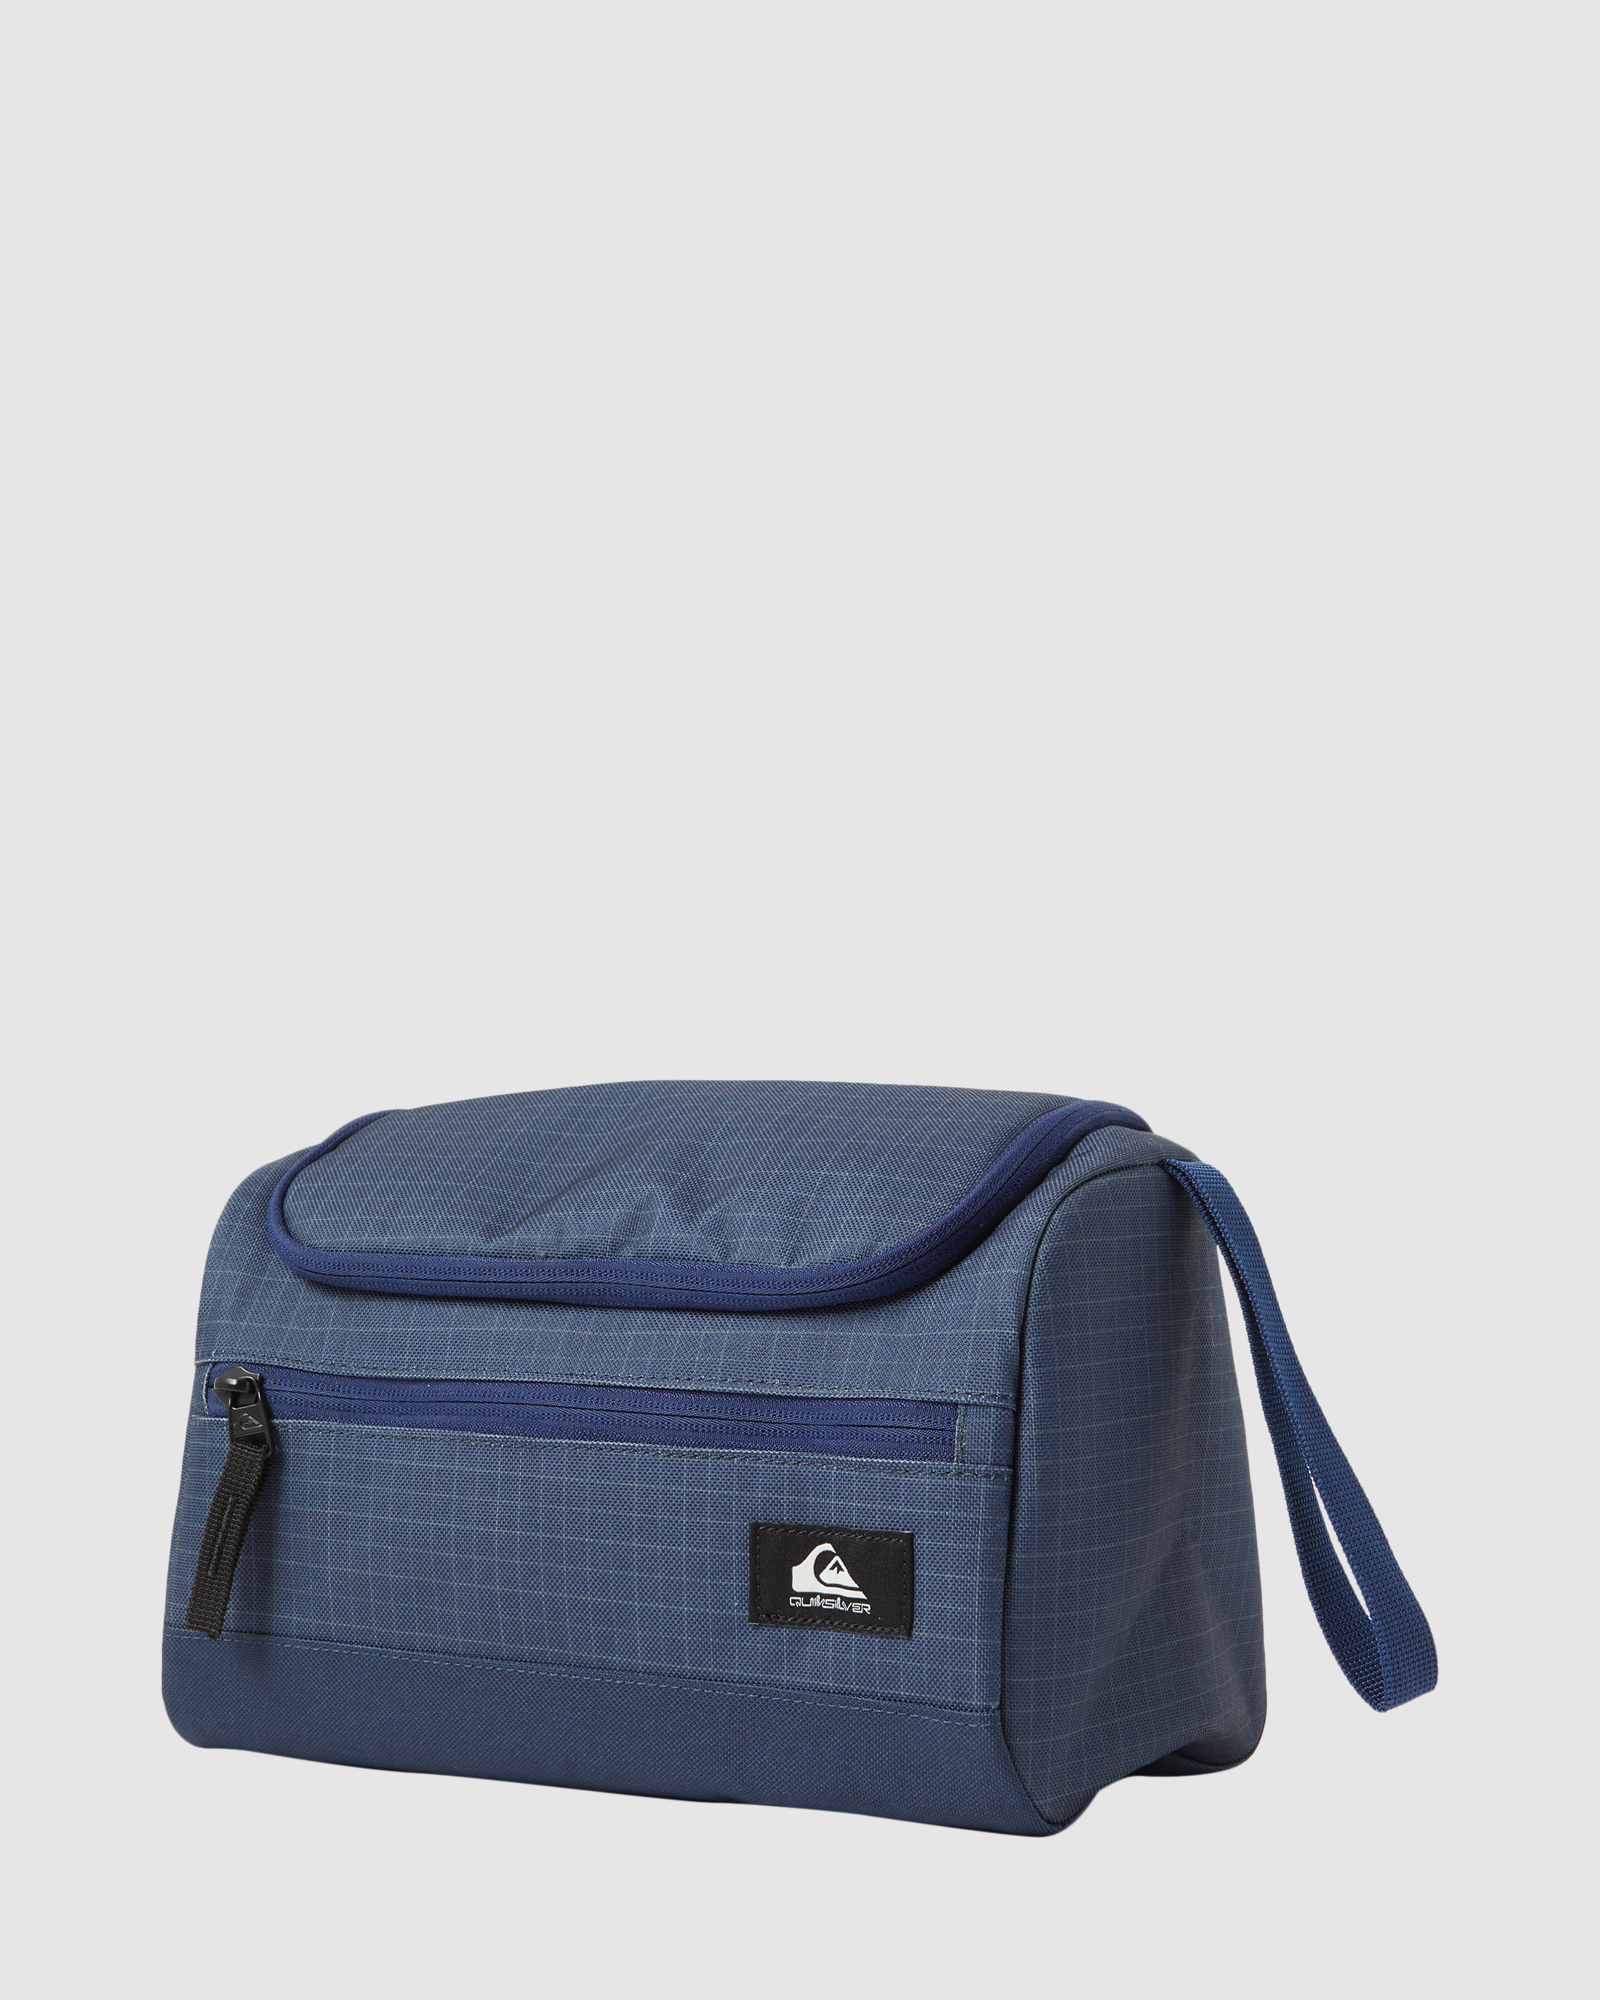 Quiksilver Capsule 6L Travel Kit - Naval Academy | SurfStitch